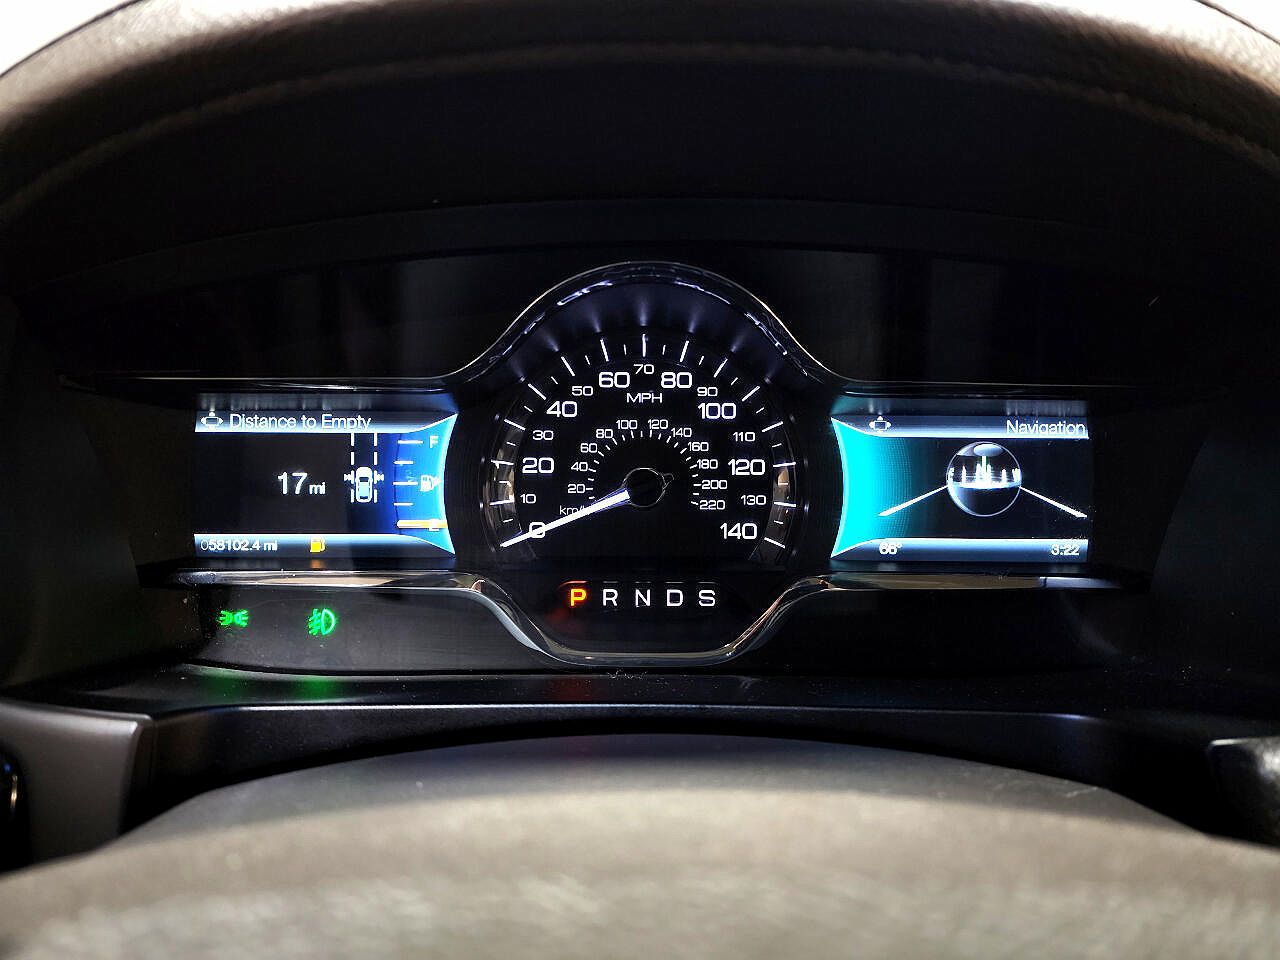 2015 Lincoln MKS null image 49